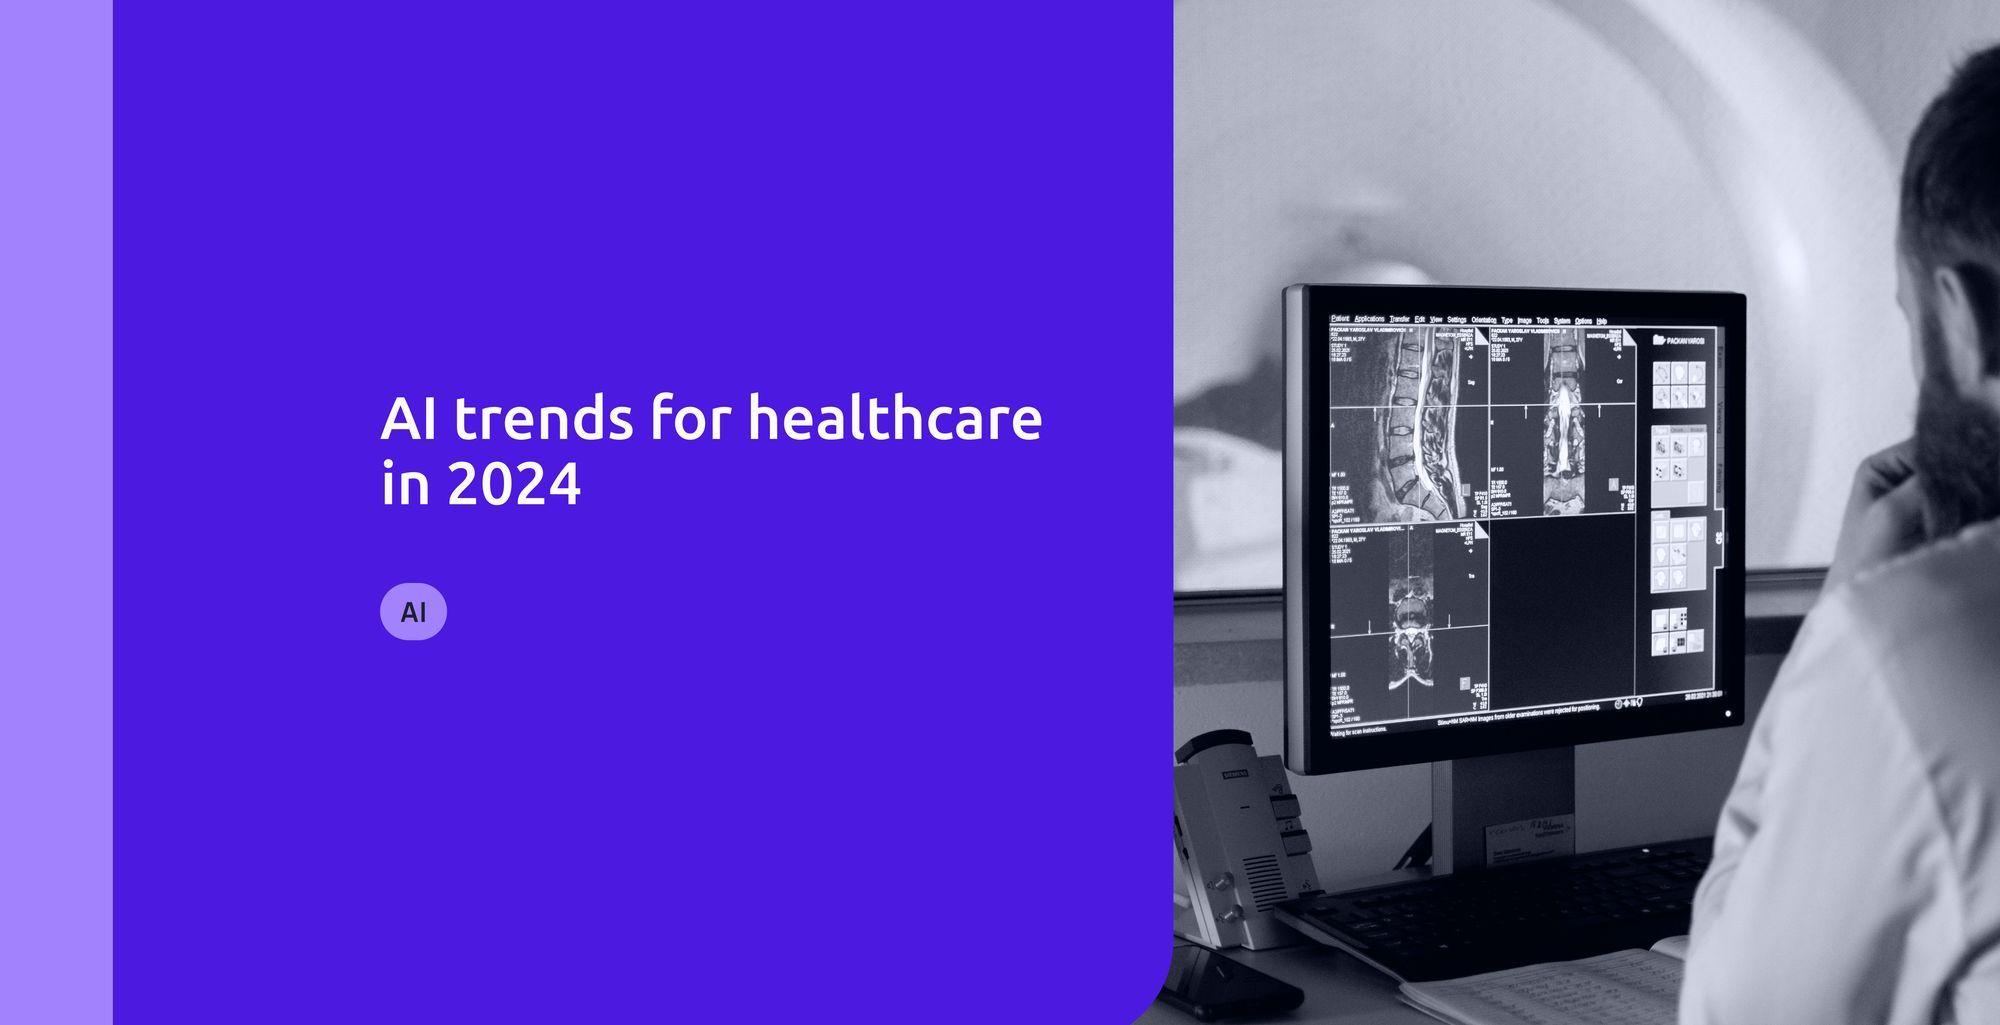 AI trends for healthcare in 2024